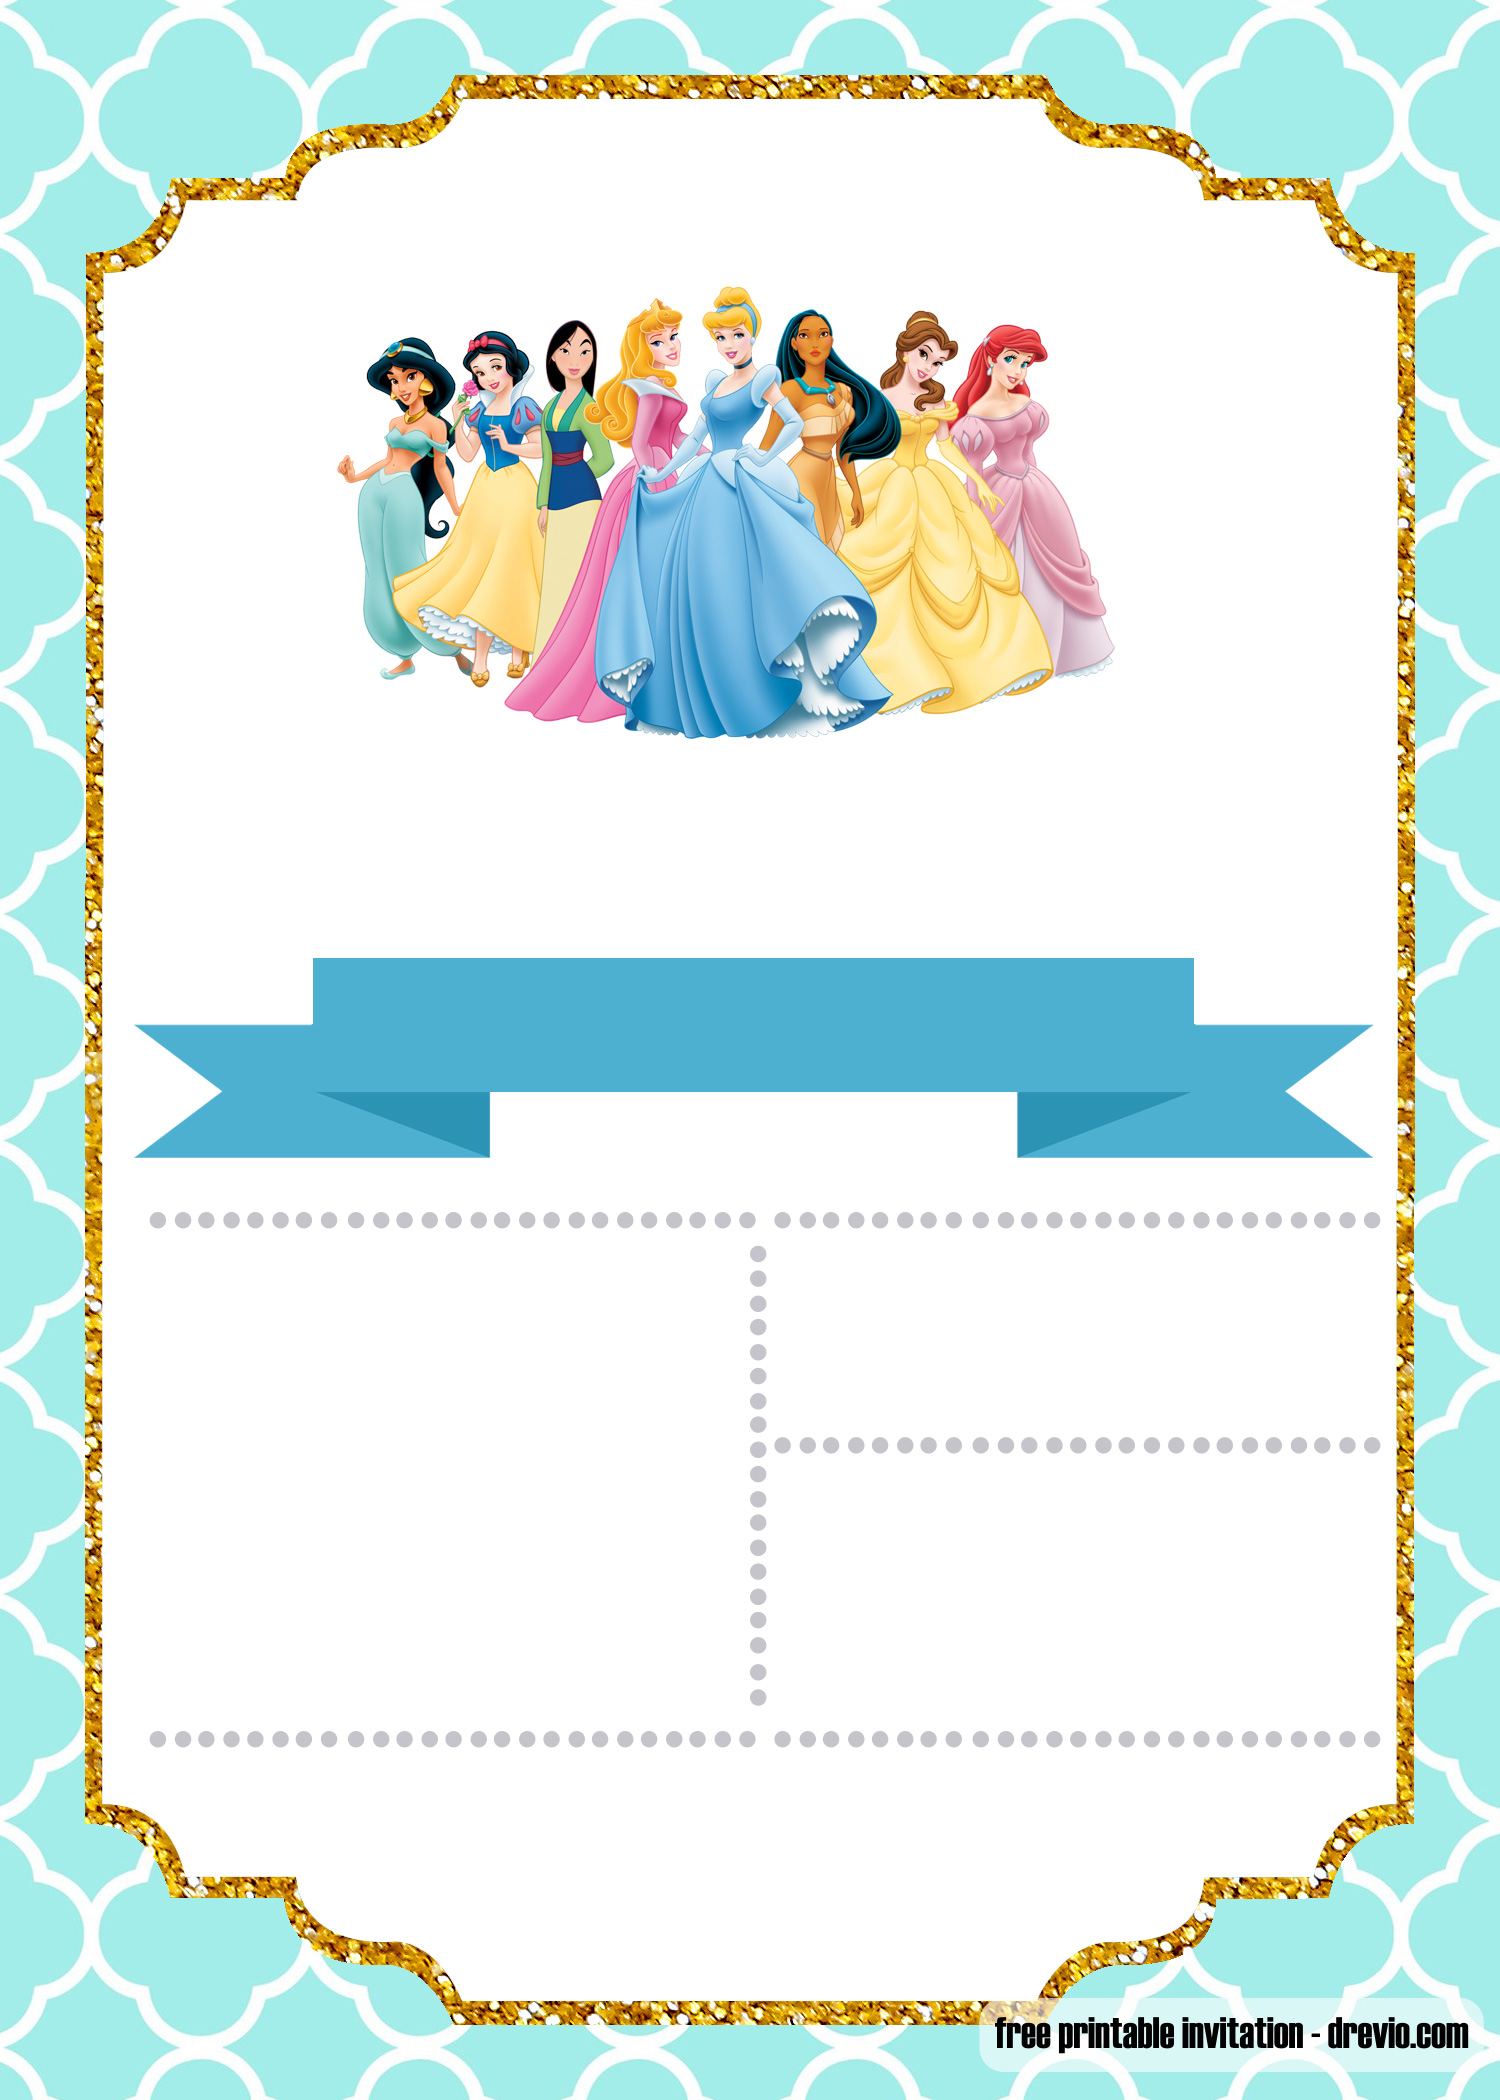 free-disney-princess-invitation-template-for-your-little-girl-s-birthday-download-hundreds